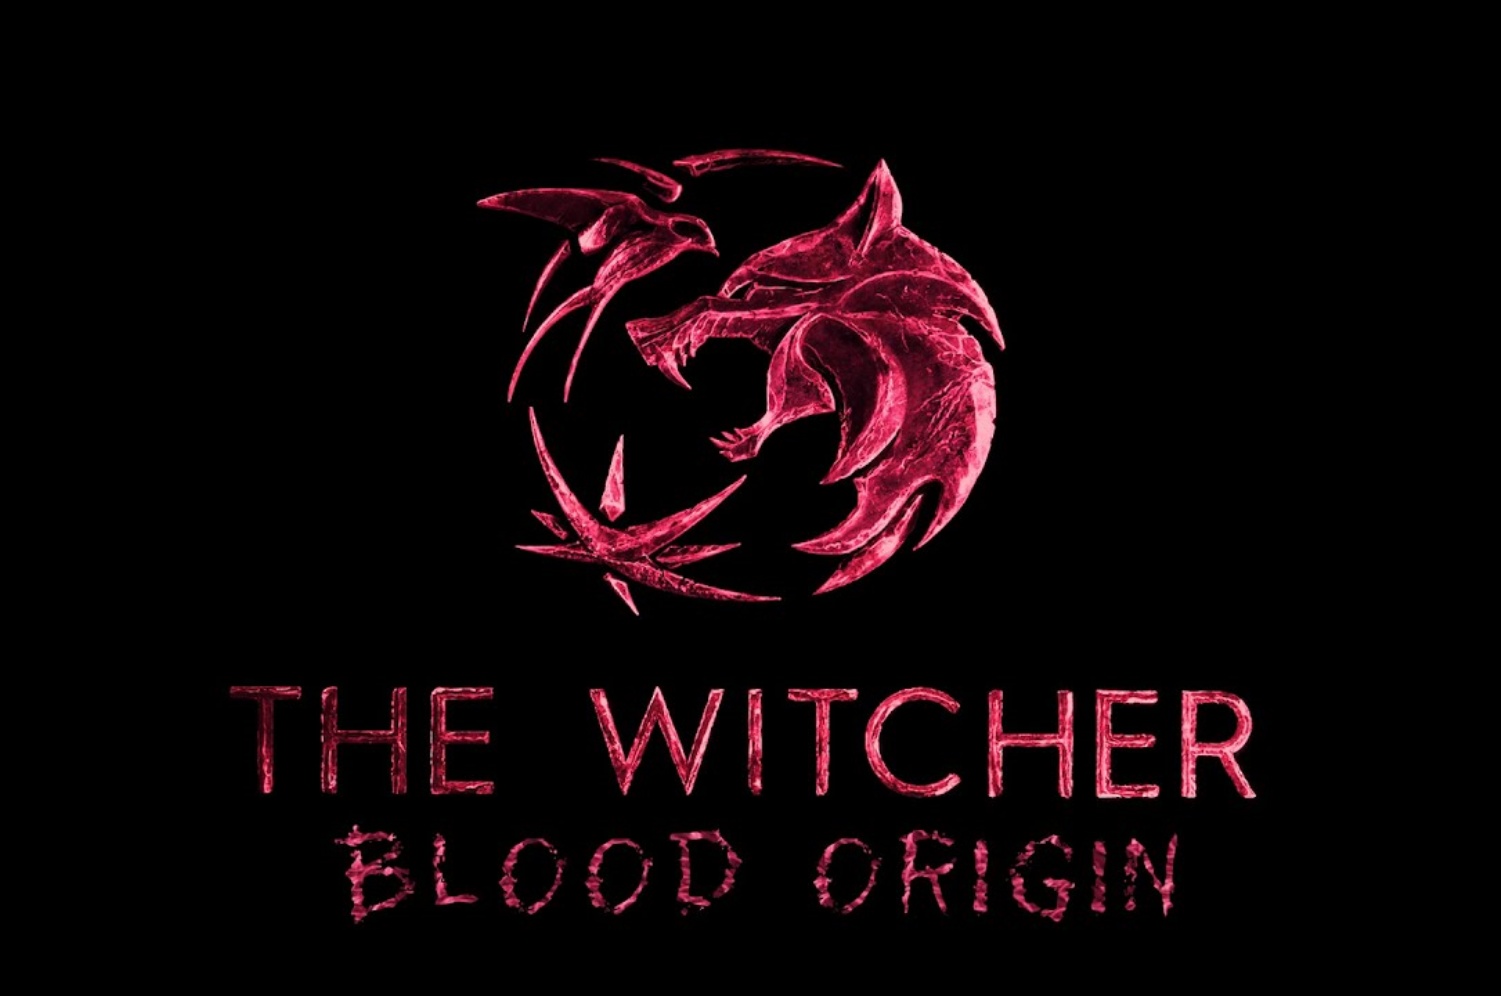 The Witcher: Blood Orign